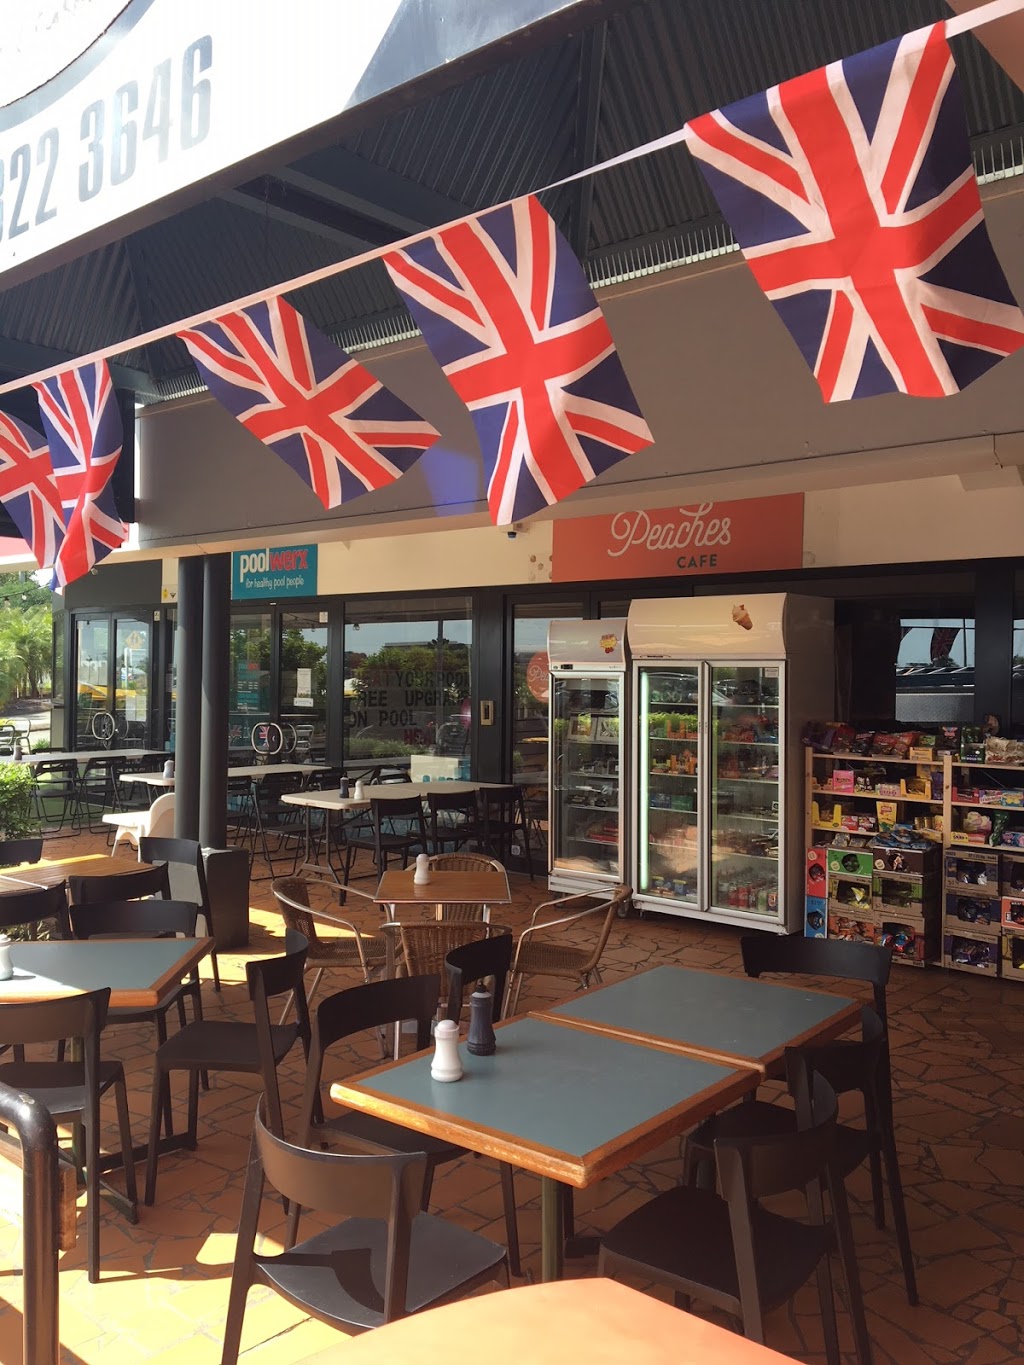 Chumley Warners Traditional British Fish & Chips | meal takeaway | Shop 8/190 Birkdale Rd, Birkdale QLD 4159, Australia | 0738227787 OR +61 7 3822 7787